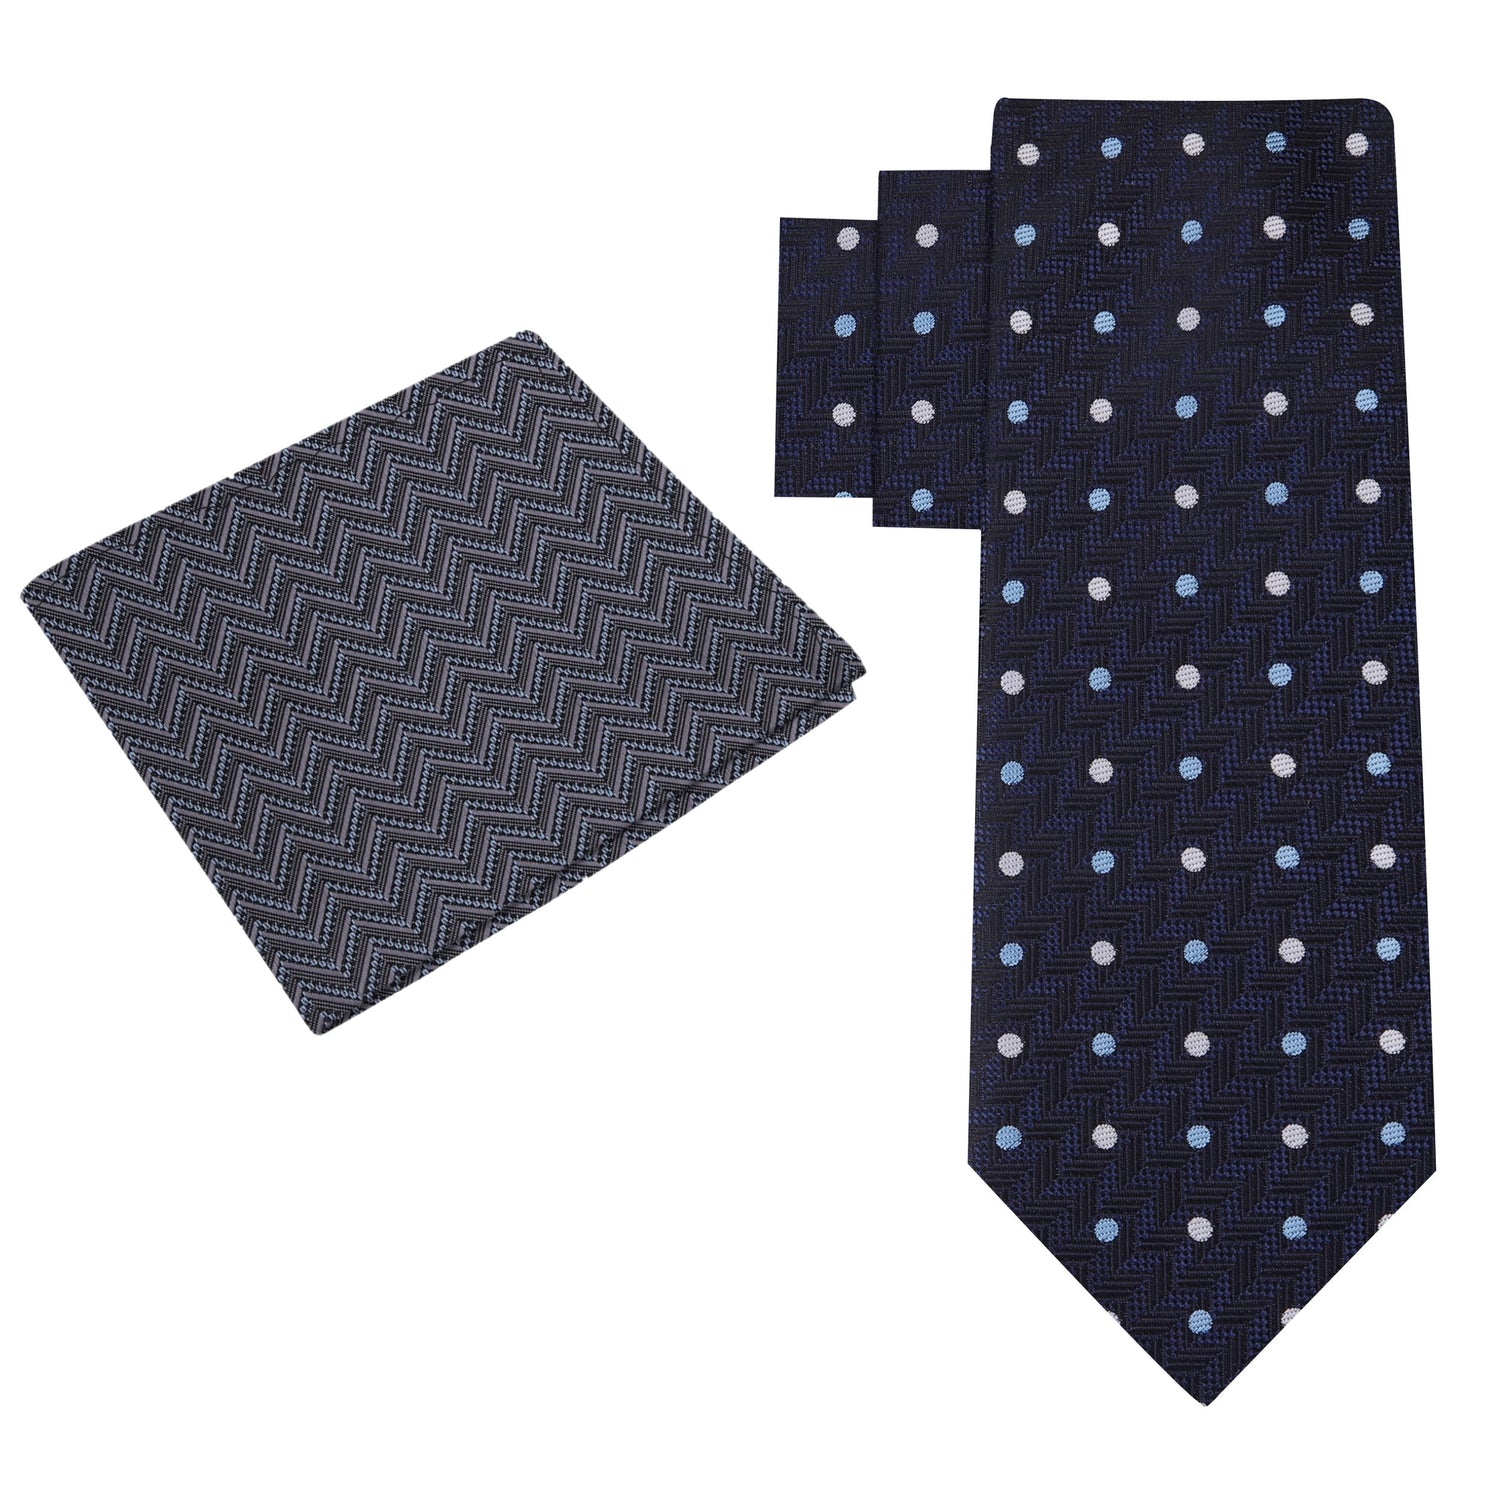 Alt View: Deep Blue, Grey, Light Blue Polka with Herringbone Tie and Grey, Light Blue Wavy Lines Square